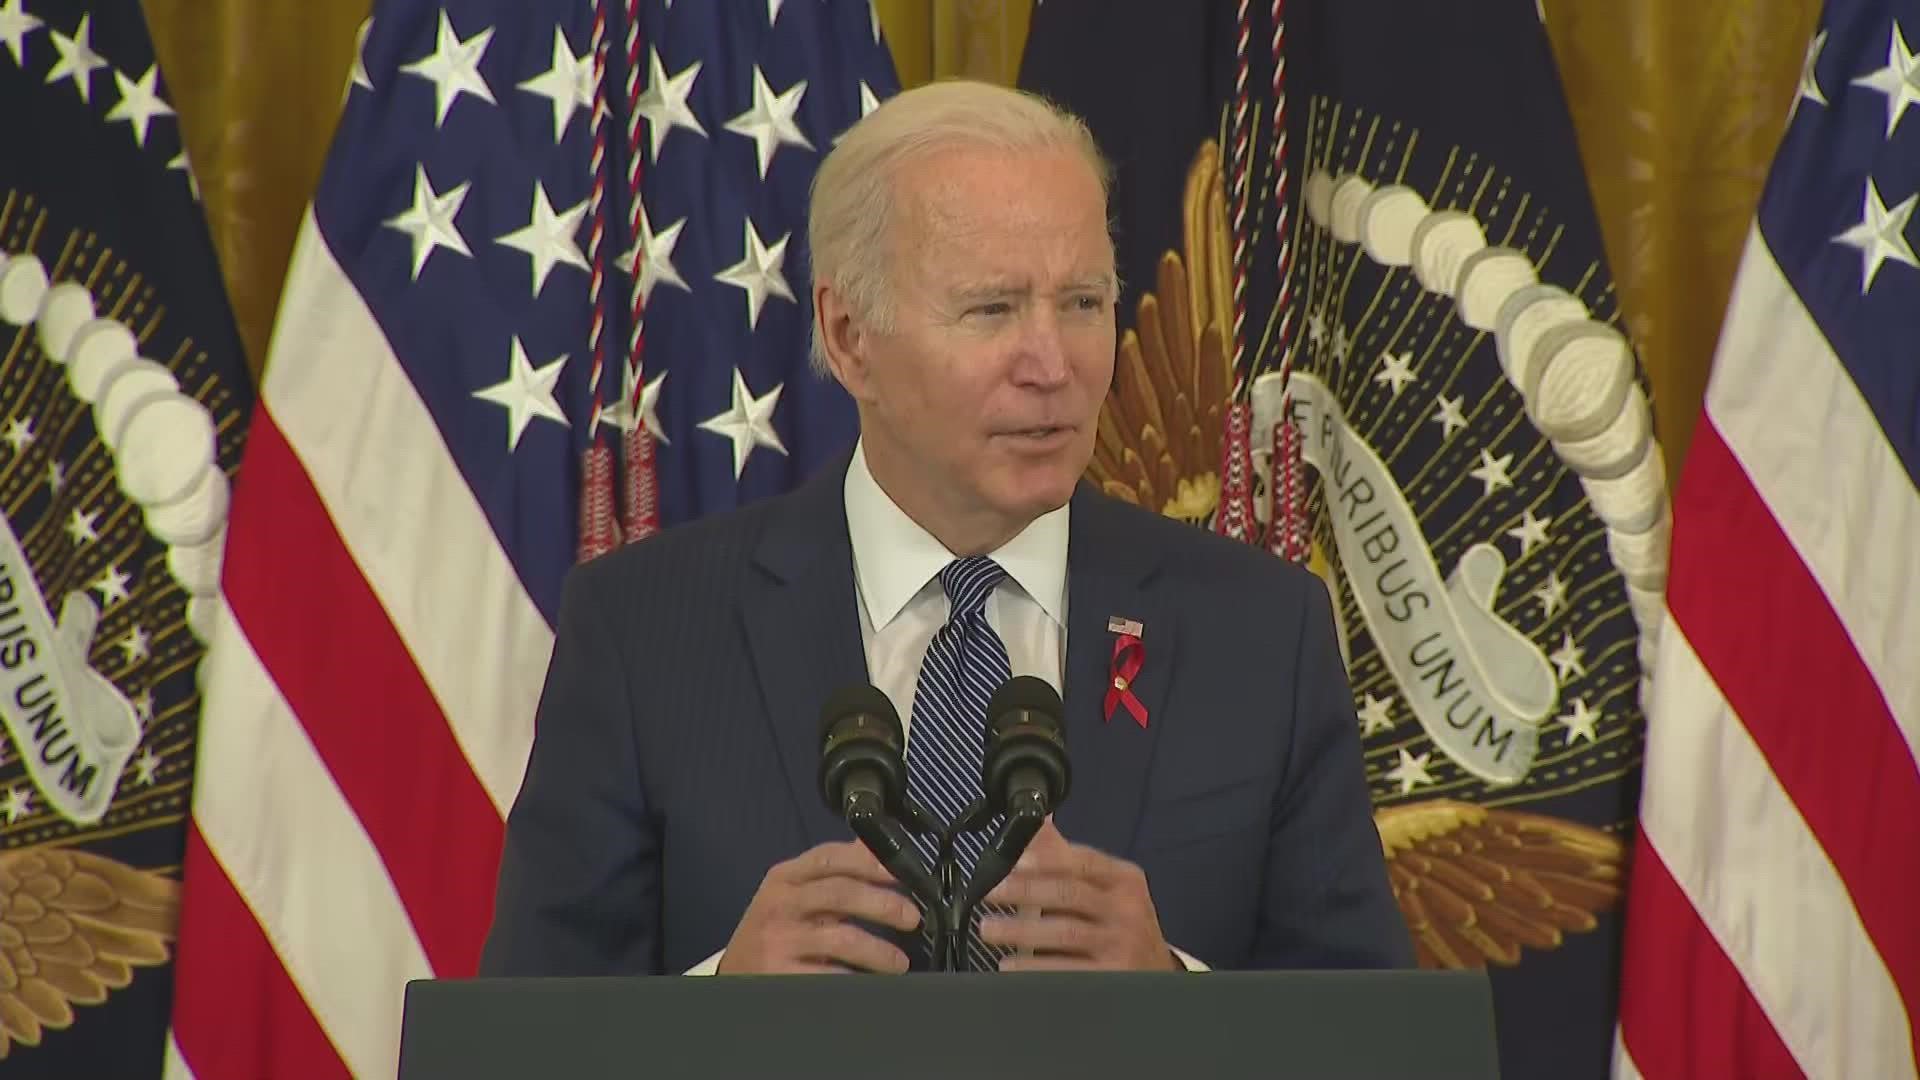 President Joe Biden marks World AIDS Day by unveiling a new HIV/AIDS strategy that includes addressing racism's impact on people battling the virus.